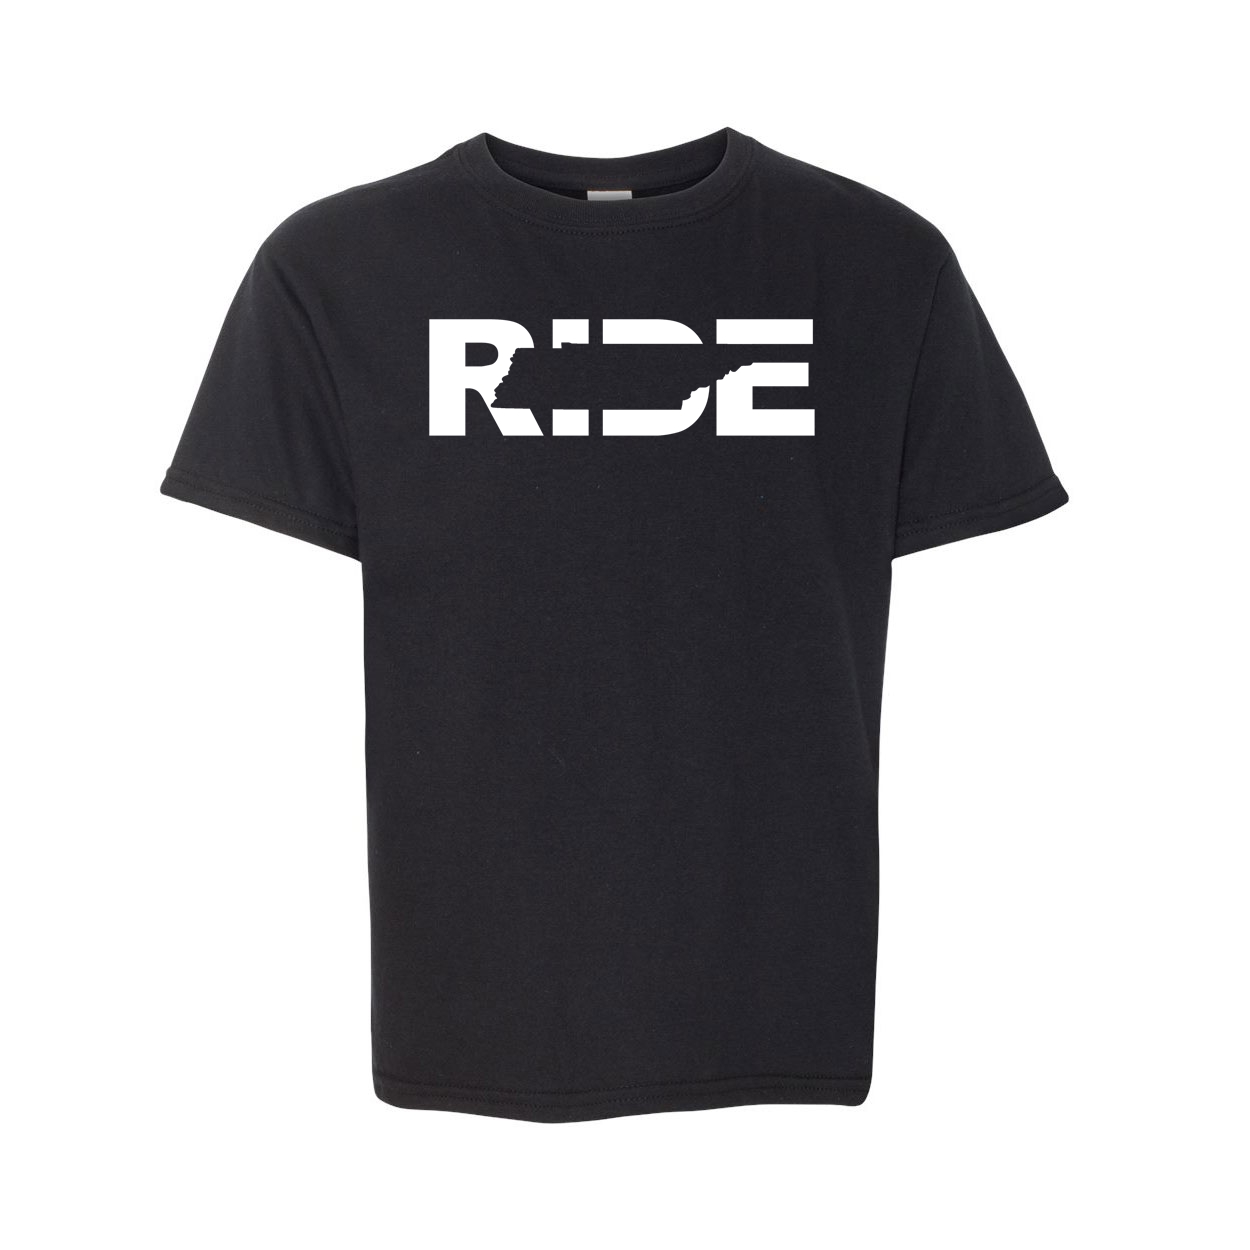 Ride Tennessee Classic Youth T-Shirt Black (White Logo)